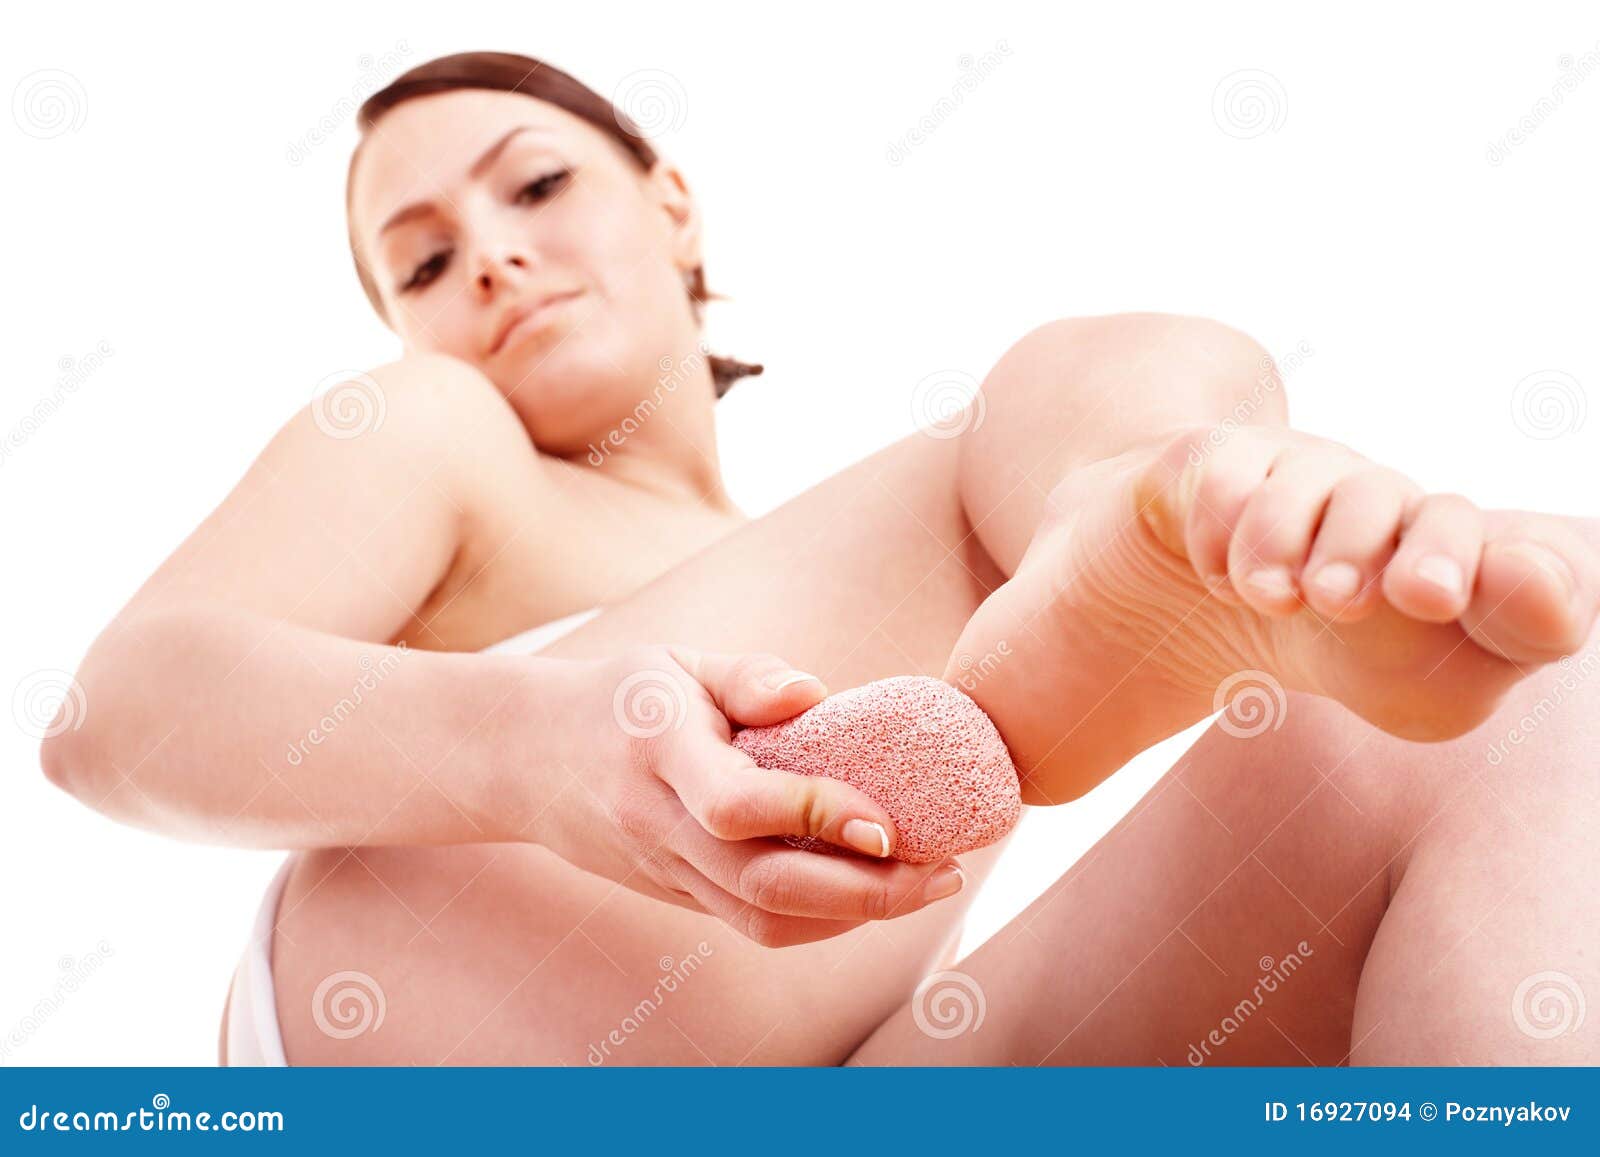 woman rubbing heel of foot with pumice stone.